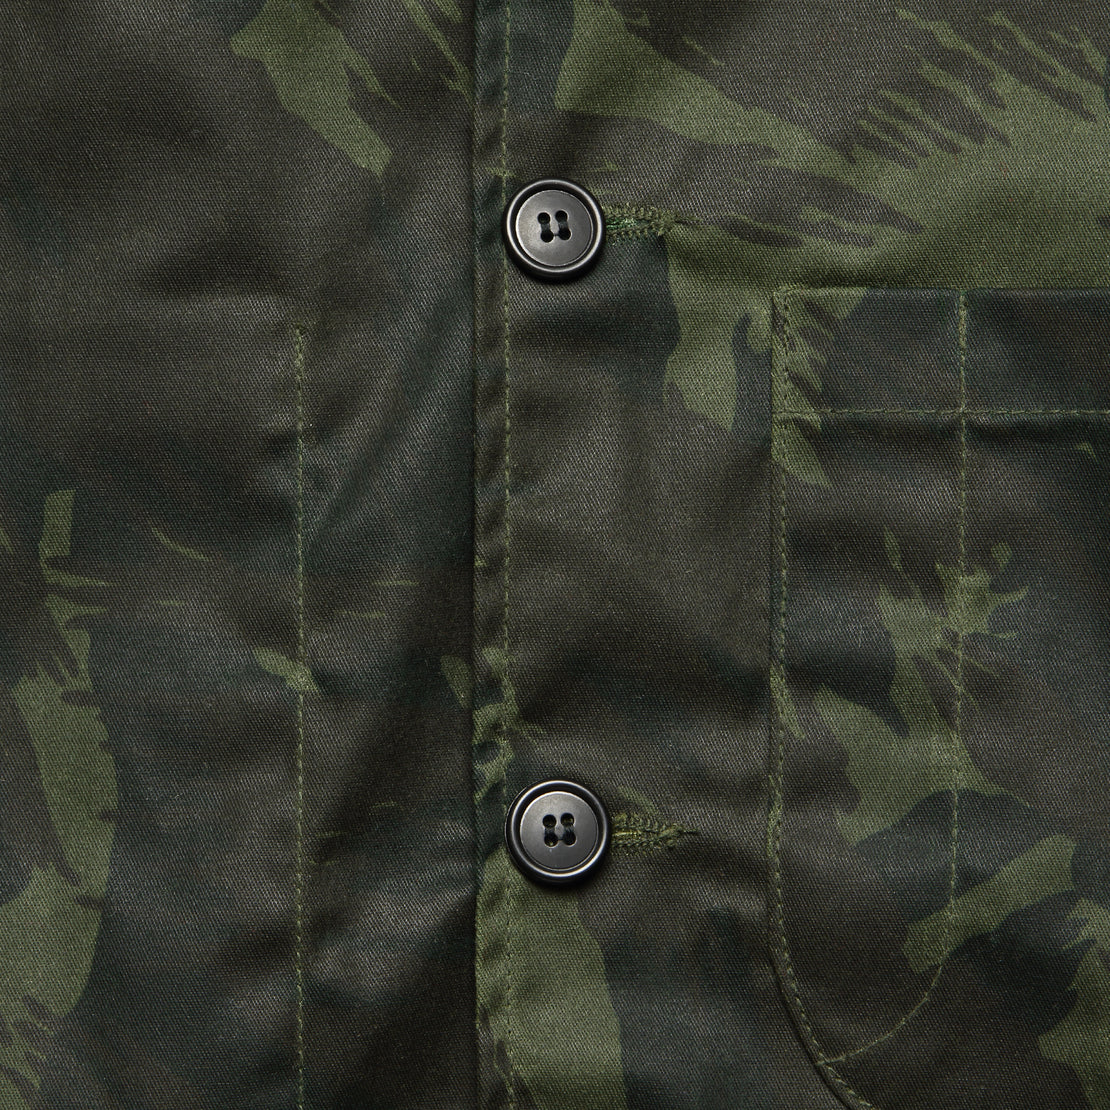 Waxed Canvas Explorer Jacket - Camo - Rogue Territory - STAG Provisions - Outerwear - Coat / Jacket